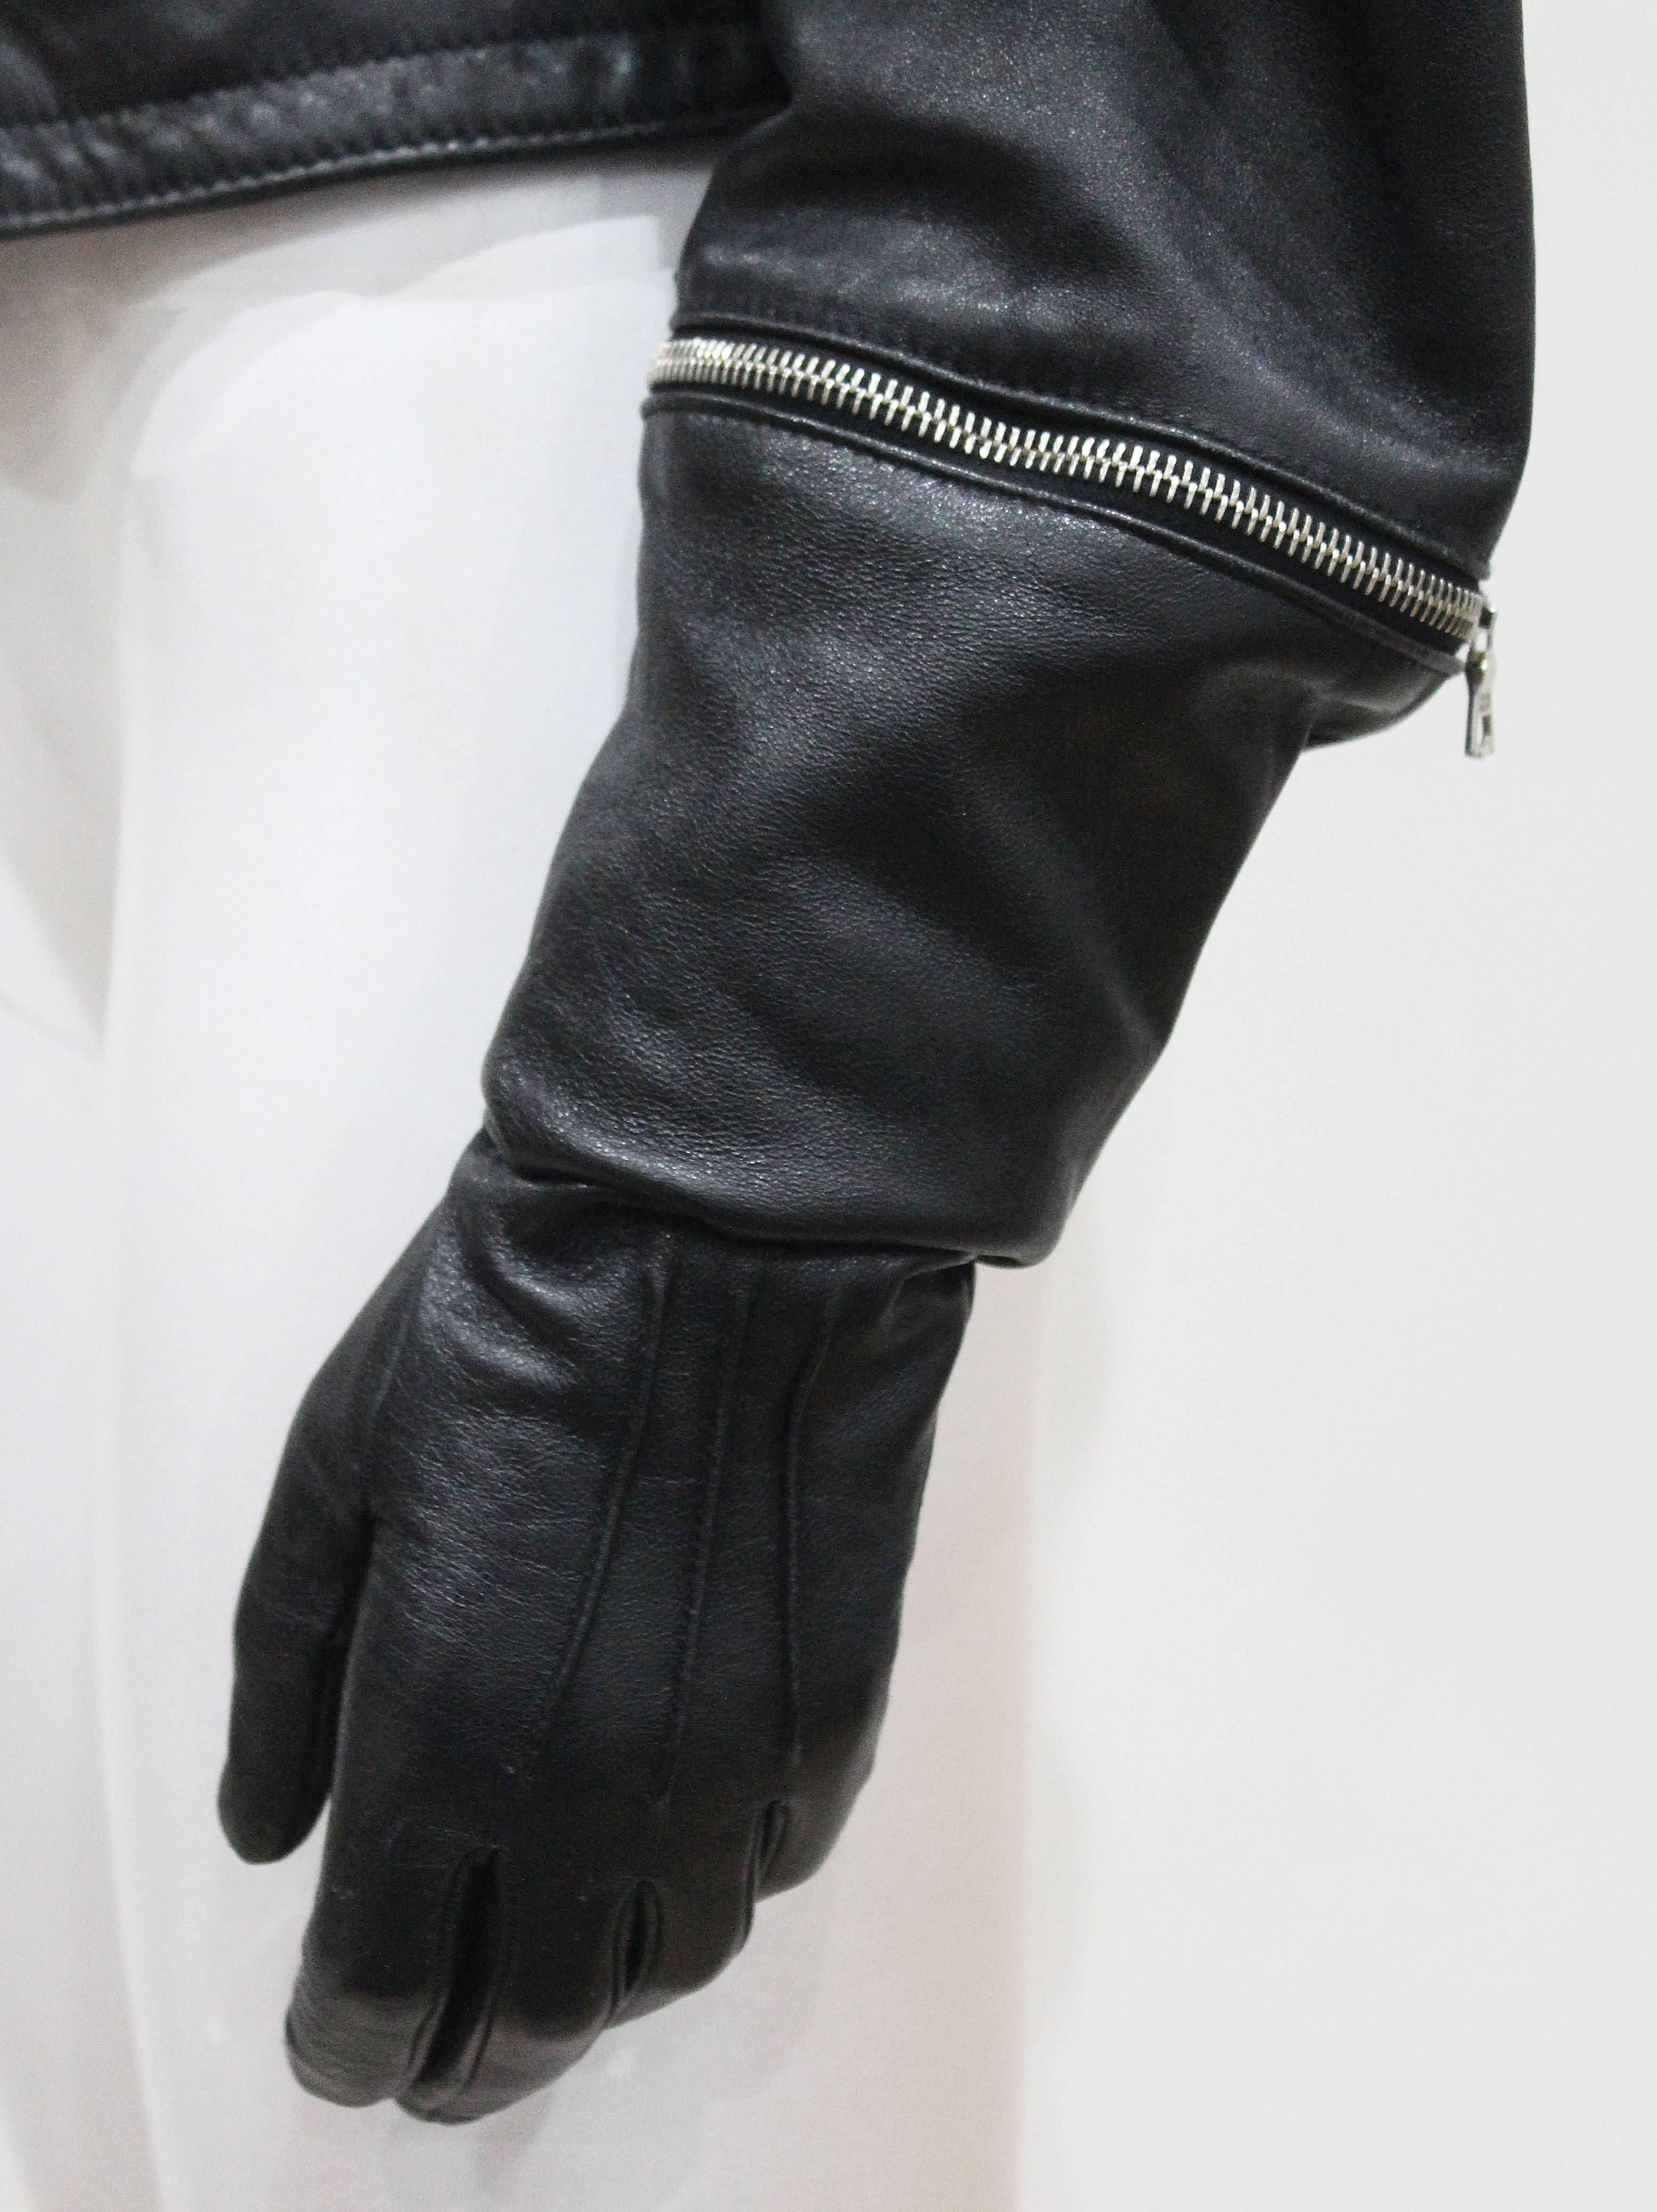 gloves attached to jacket